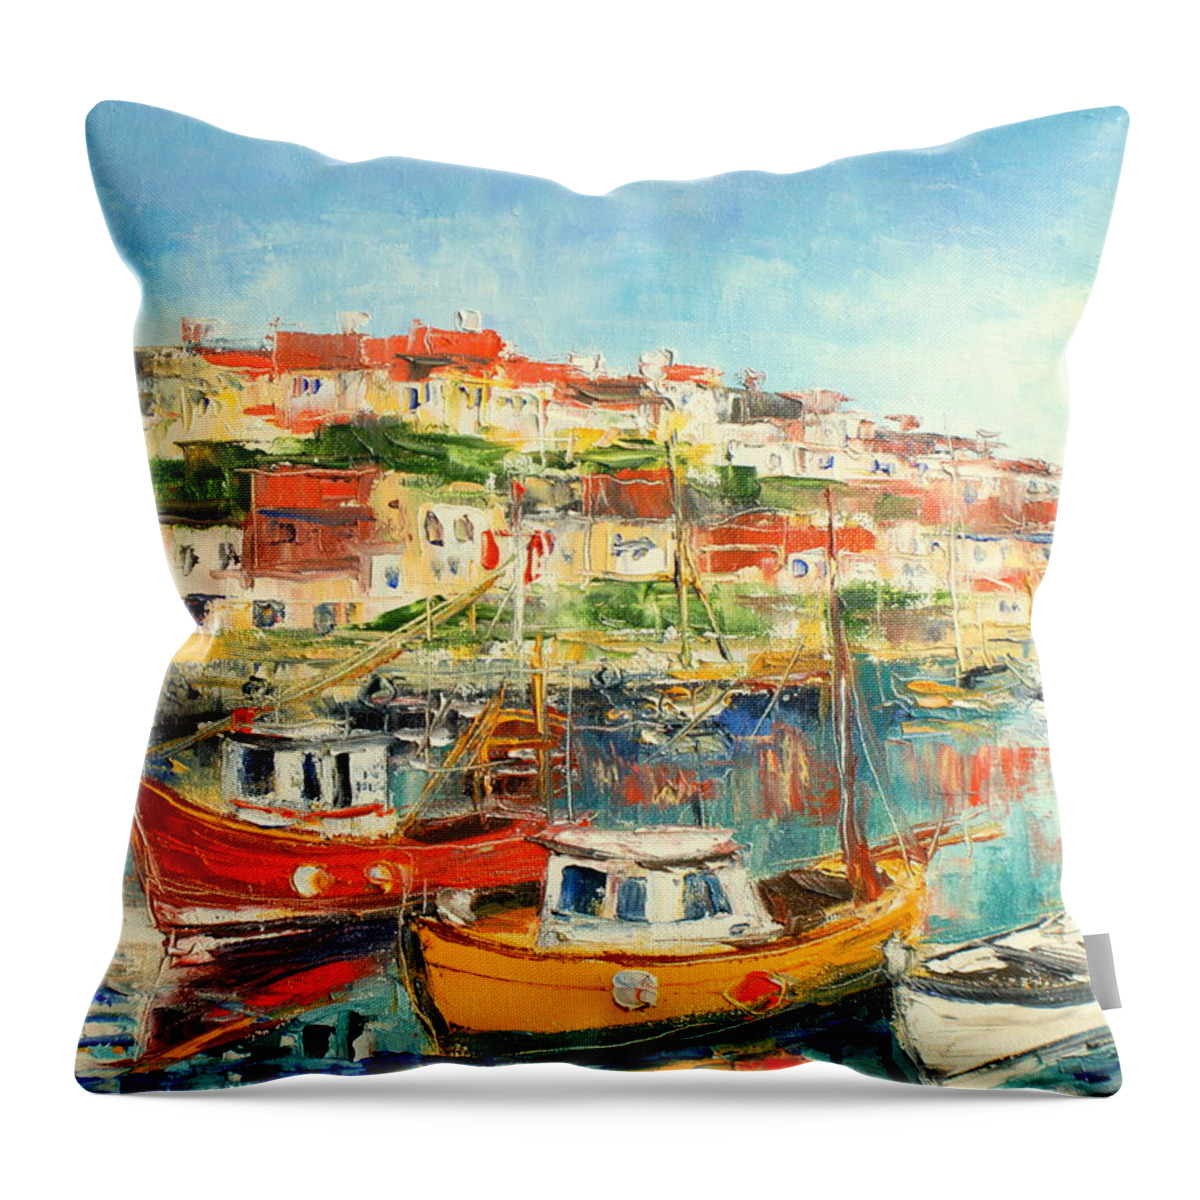 Brixham Throw Pillow featuring the painting The Brixham Harbour #1 by Luke Karcz